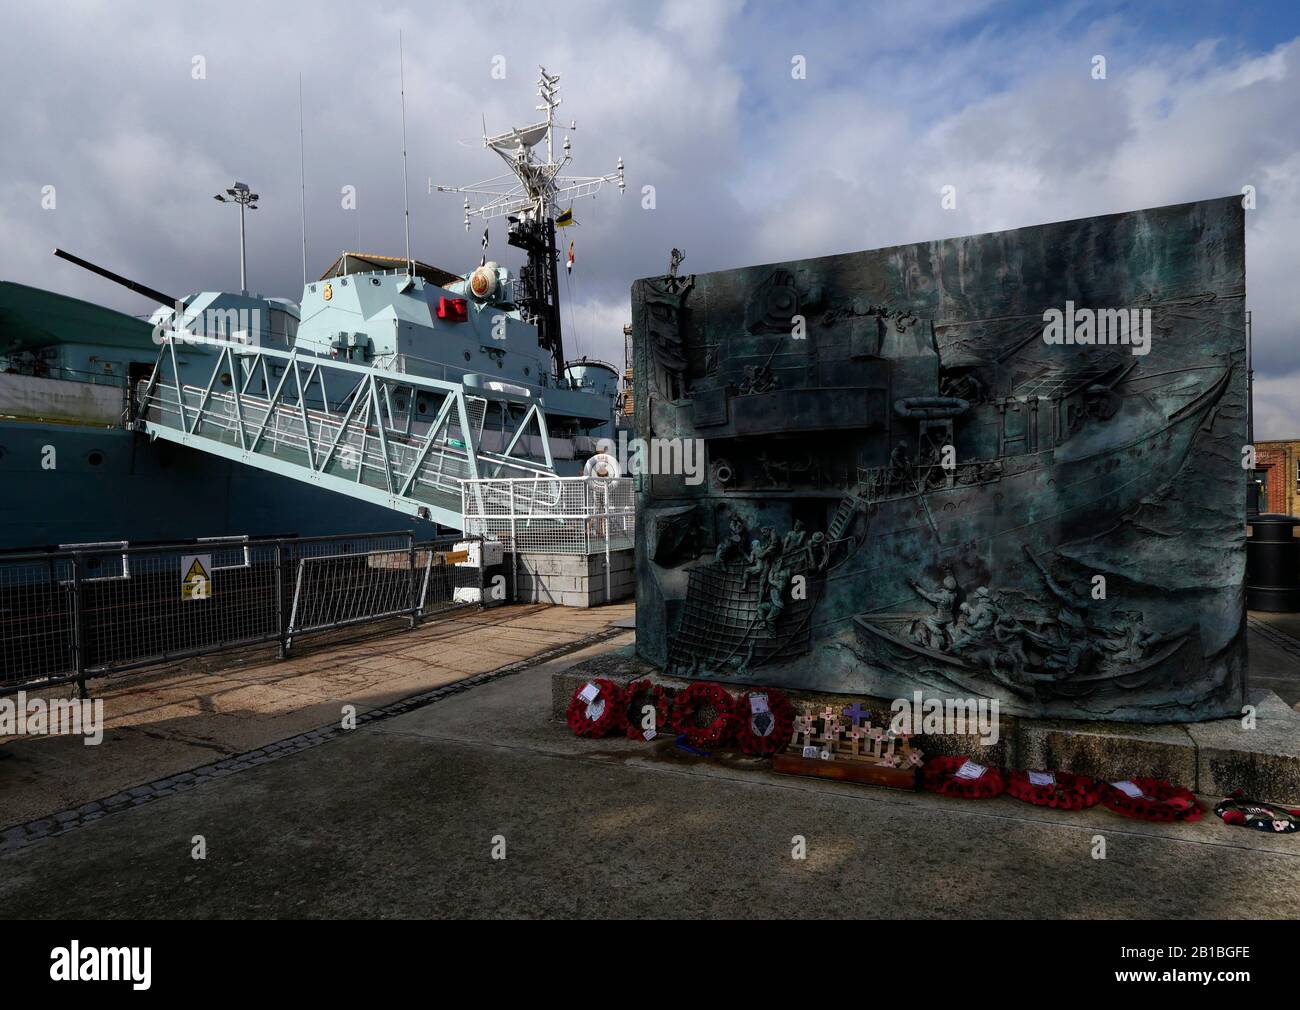 AJAXNETPHOTO. 3RD APRIL, 2019. CHATHAM, ENGLAND. - CHATHAM HISTORIC DOCKYARD - THE NATIONAL DESTROYER MEMORIAL, A BRONZE SCULPTURE SITED ALONGSIDE PRESERVED WW II C CLASS DESTROYER HMS CAVALIER TO THE 11,000 MEN AND 142 ROYAL NAVAL AND ALLIED DESTROYERS LOST DURING BETWEEN 1939-45. VERSO OF THE PLAQUE LISTS NAMES OF THE SHIPS LOST; SIDE FACING CAMERA DEPICTS SAILORS BEING PLUCKED FROM THE SEA BY A DESTROYER.PHOTO:JONATHAN EASTLAND/AJAX REF:GX8 190304 20050 Stock Photo